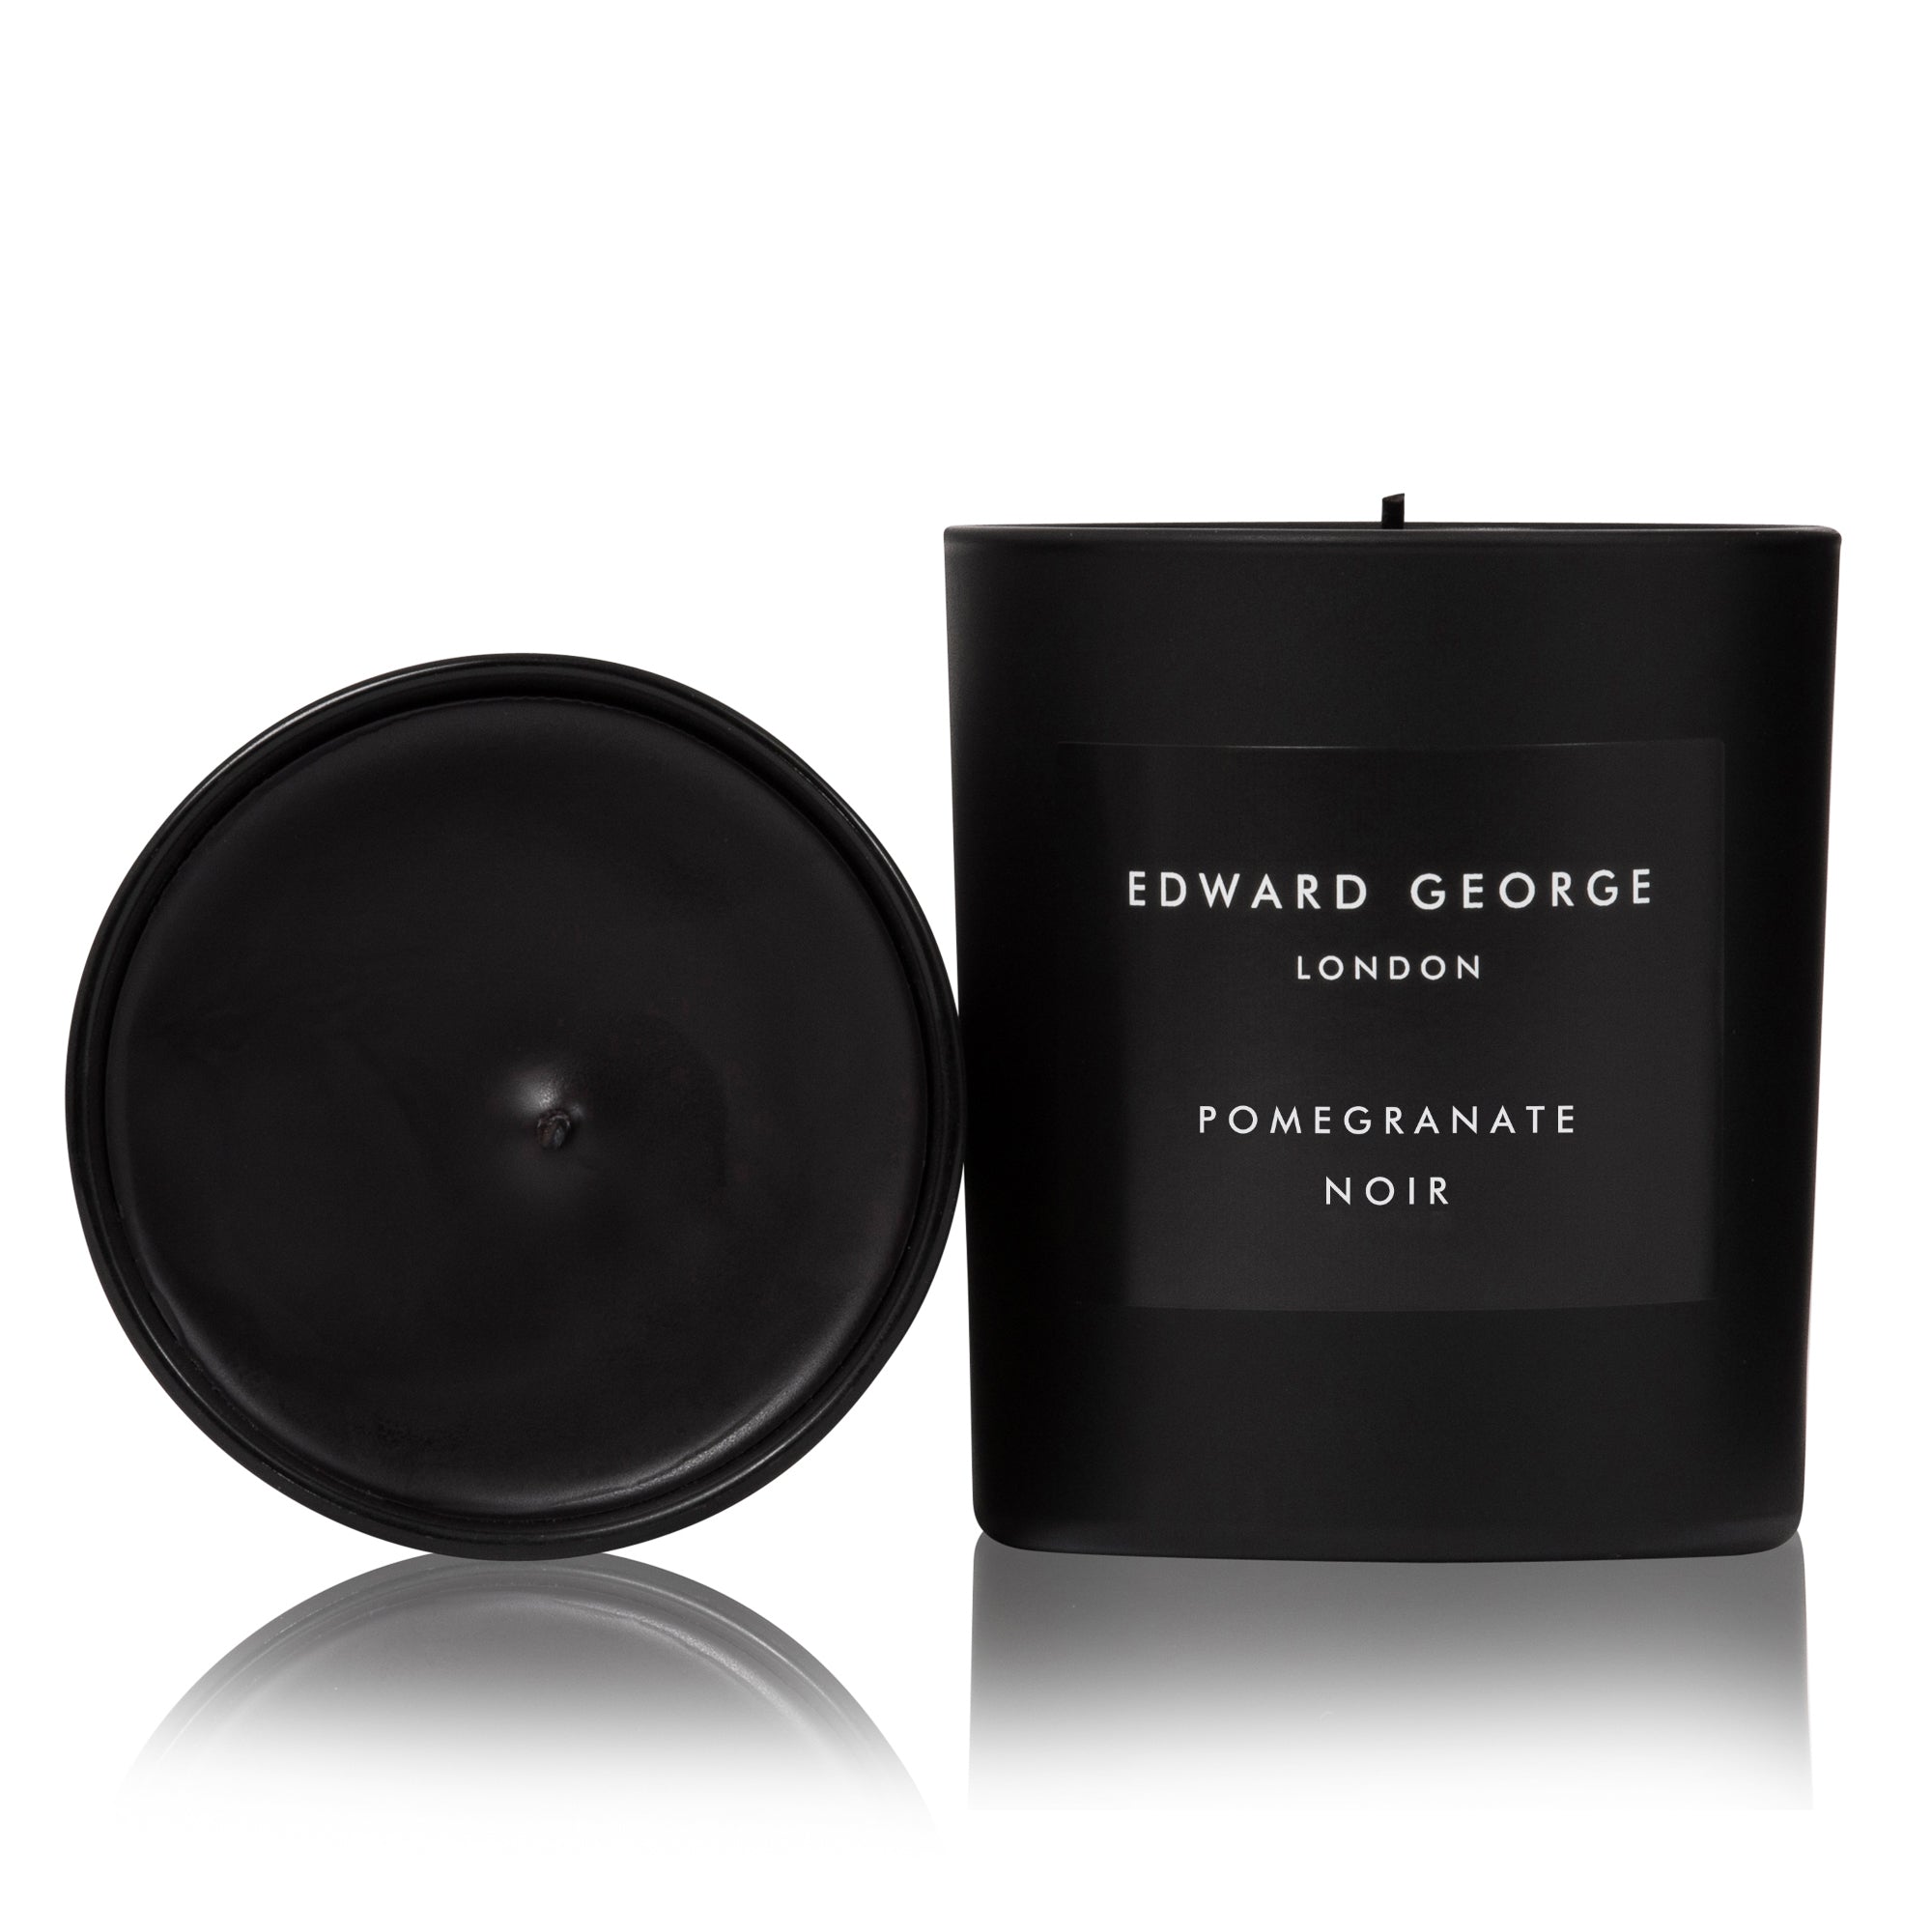 pomegranate noir candles home fragrance decor room living edward george london luxury gift ritual scent set lid mineral best black wax scented candle women men large